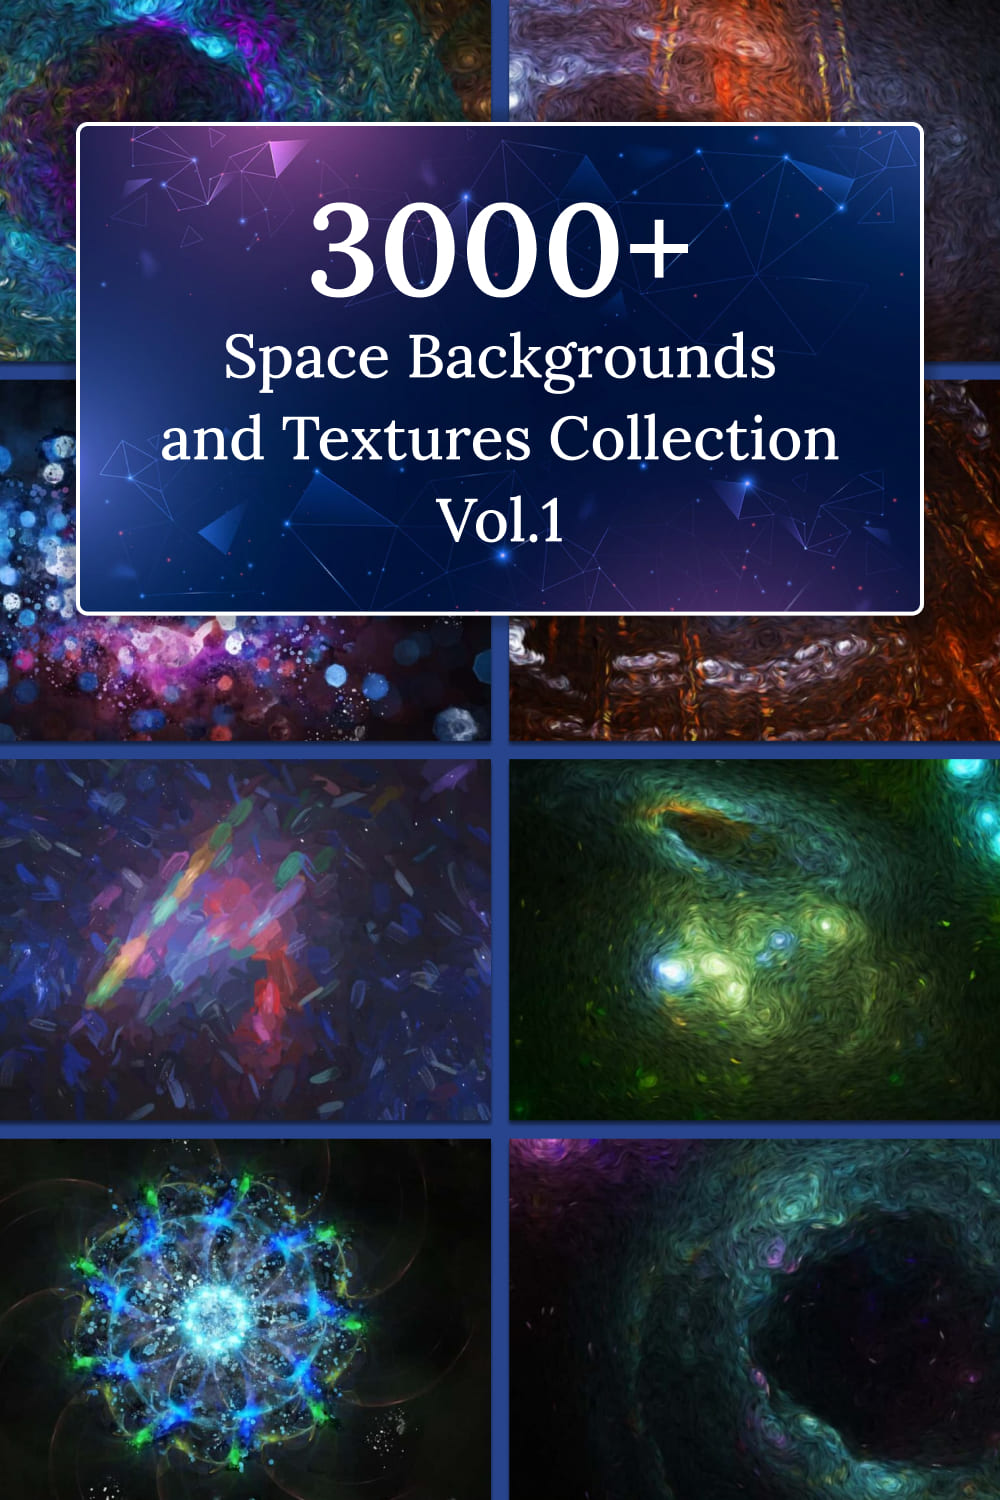 3000 space backgrounds and textures collection – vol.1 03